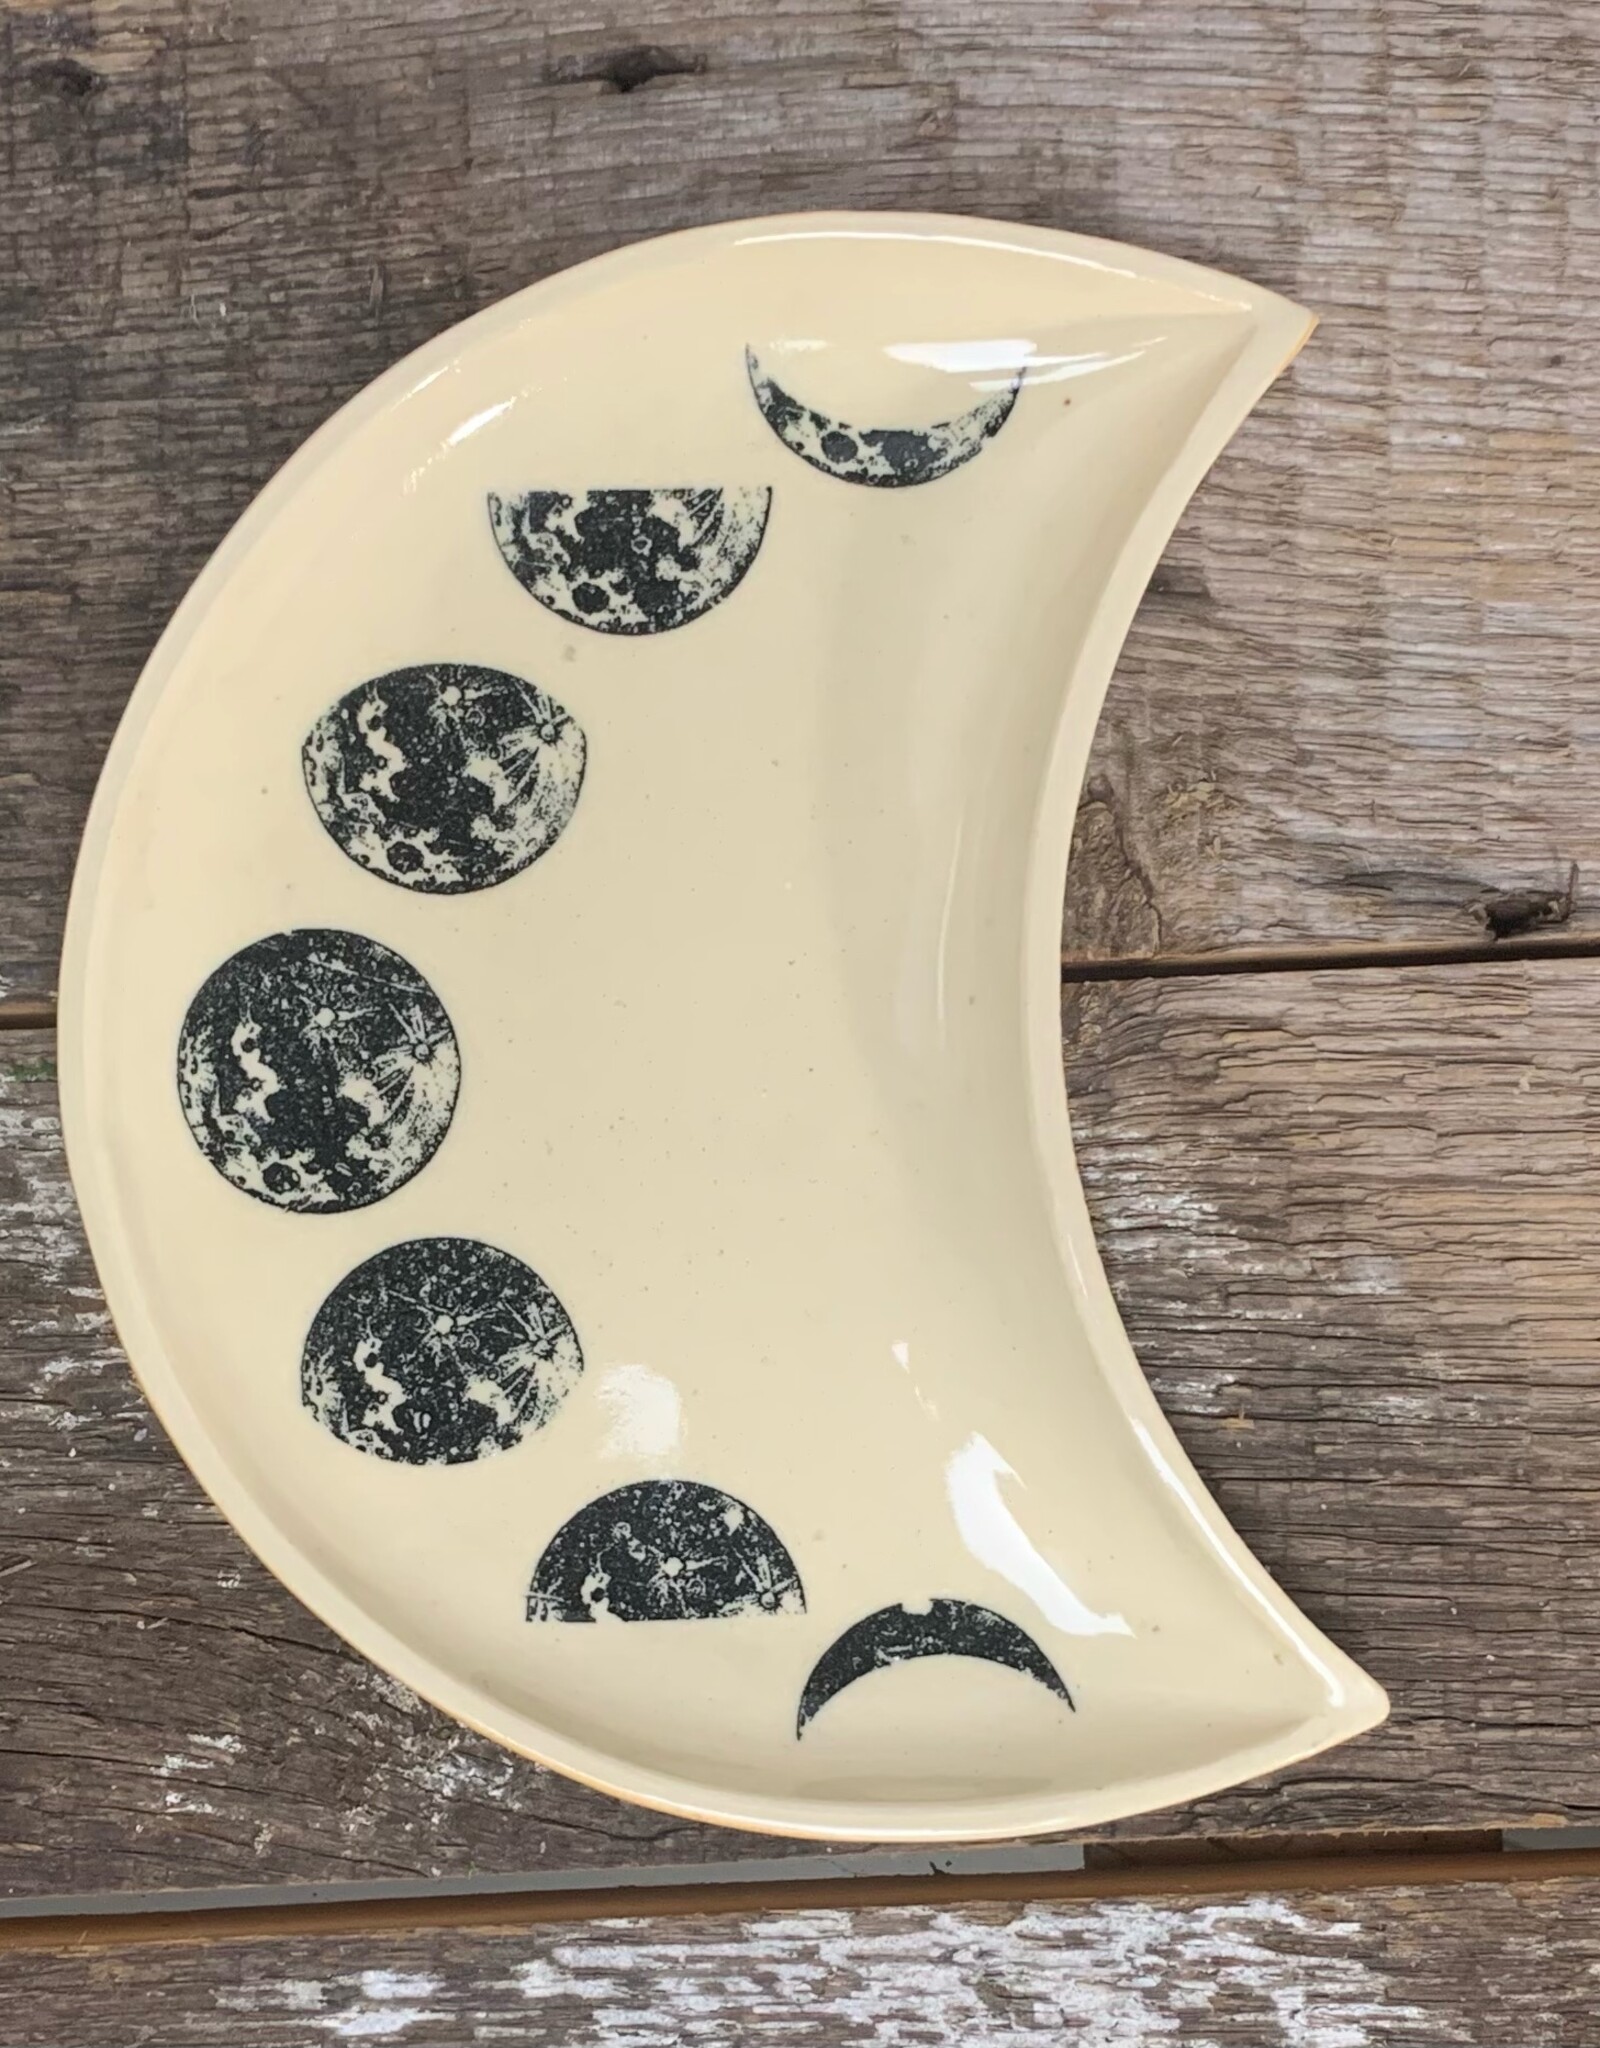 Burnt Mill Potters Crescent Moon Plate with Moon Phases | 7.5"